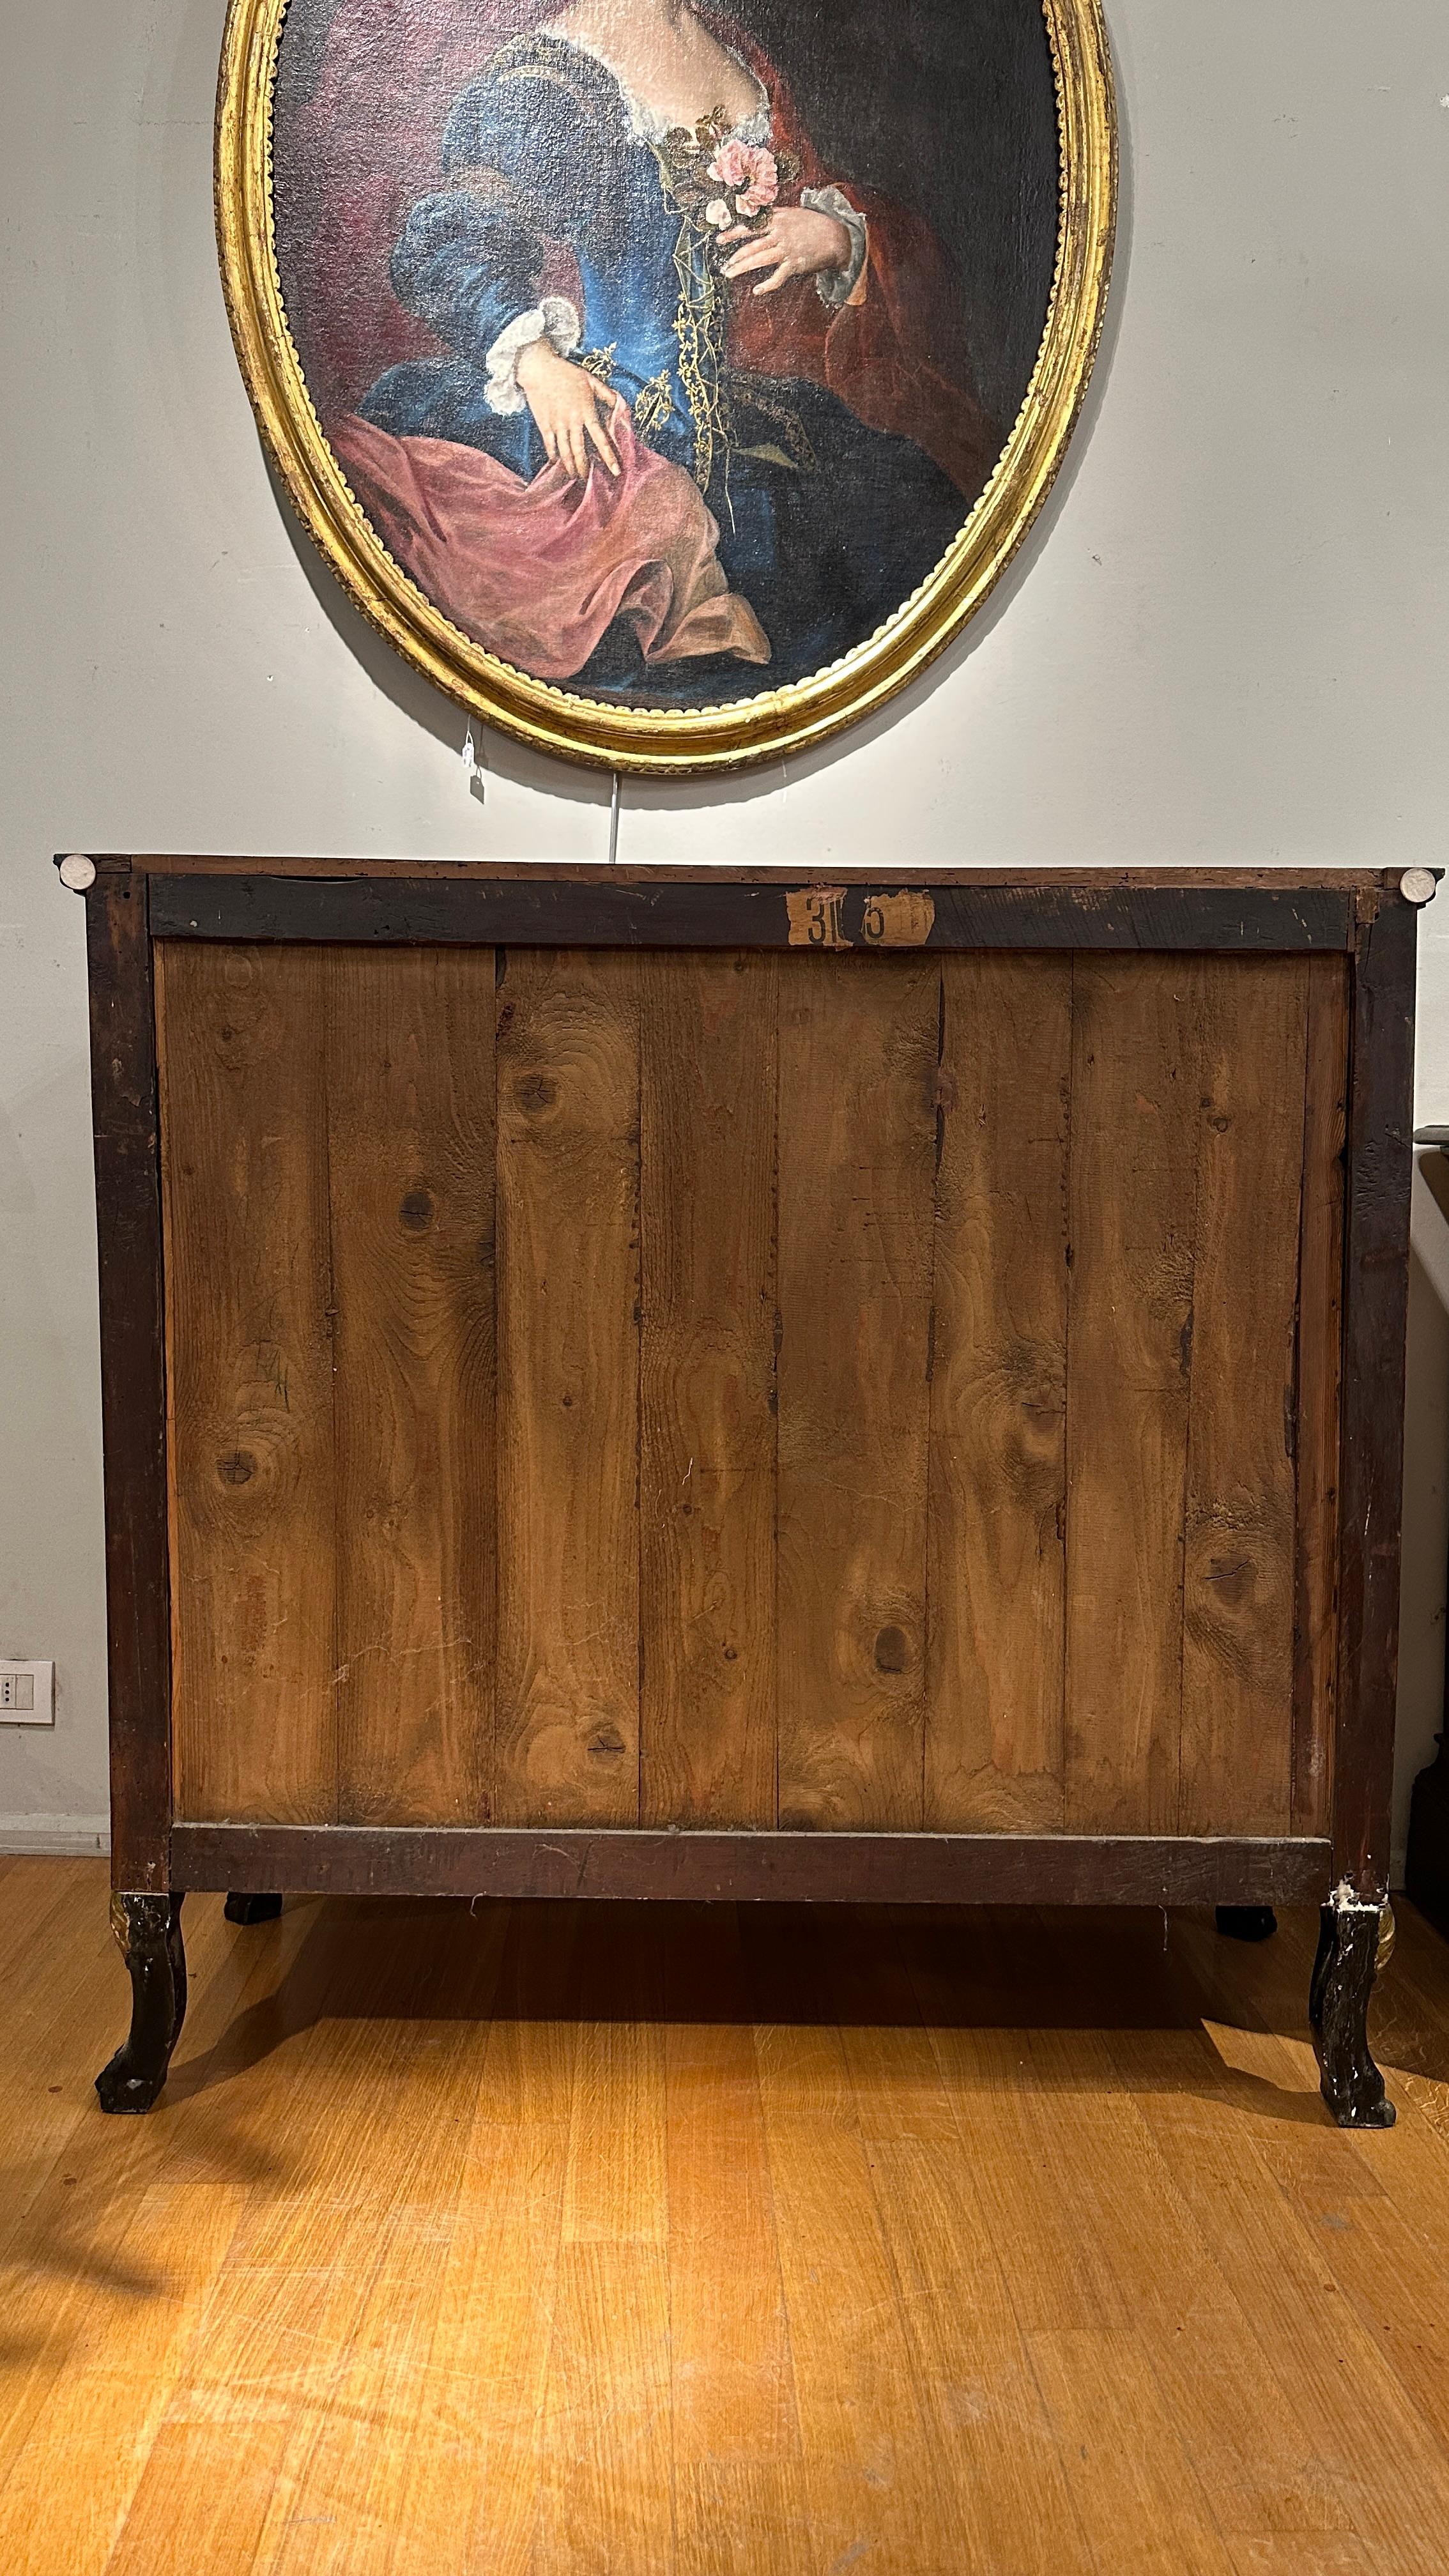 EARLY 19th CENTURY LUCHESE EMPIRE SIDEBOARD For Sale 1